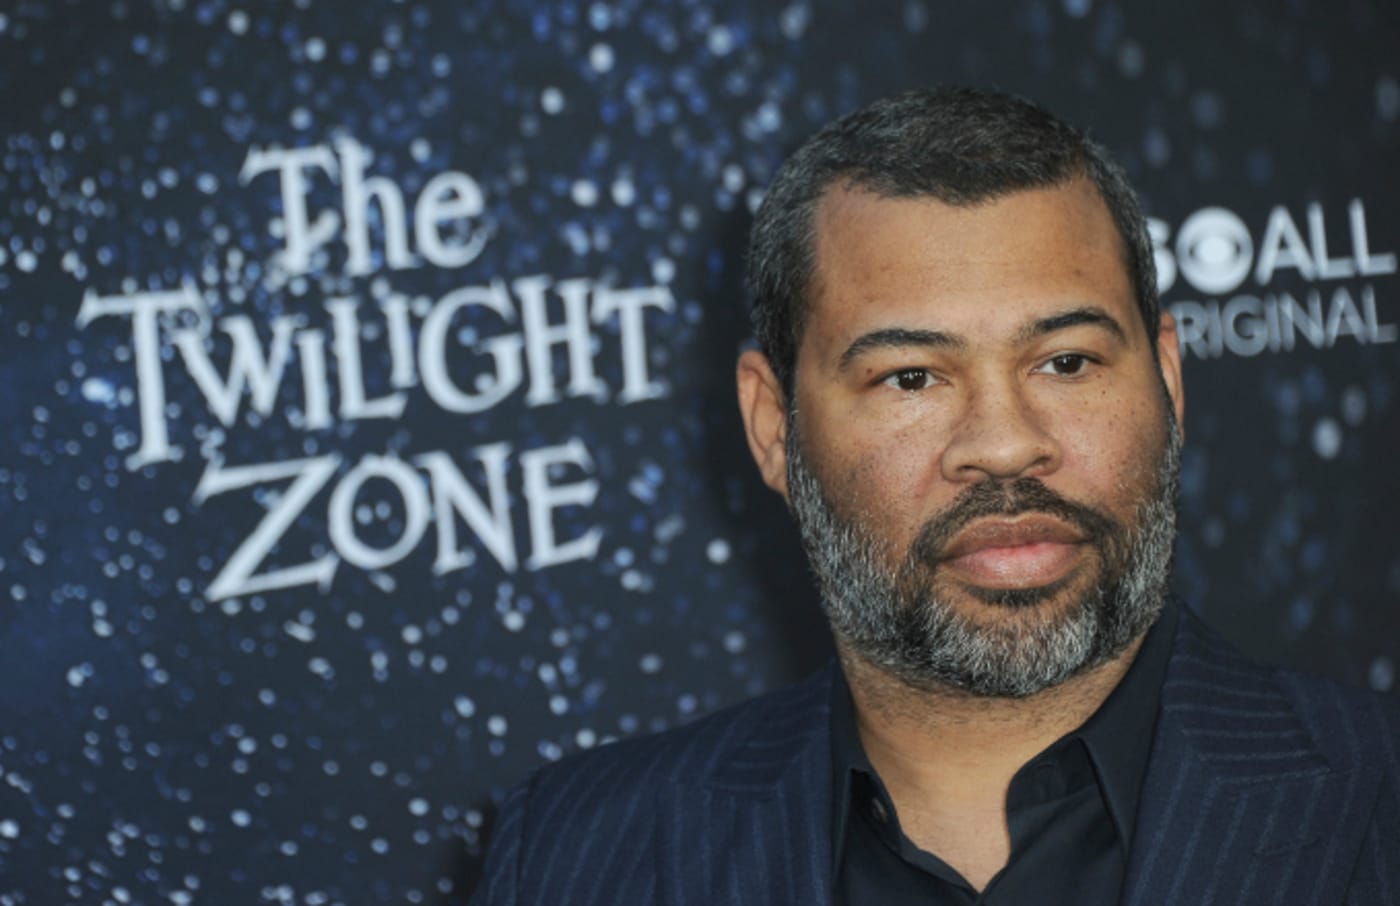 Jordan Peele arrives for the CBS All Access New Series "The Twilight Zone" Premiere